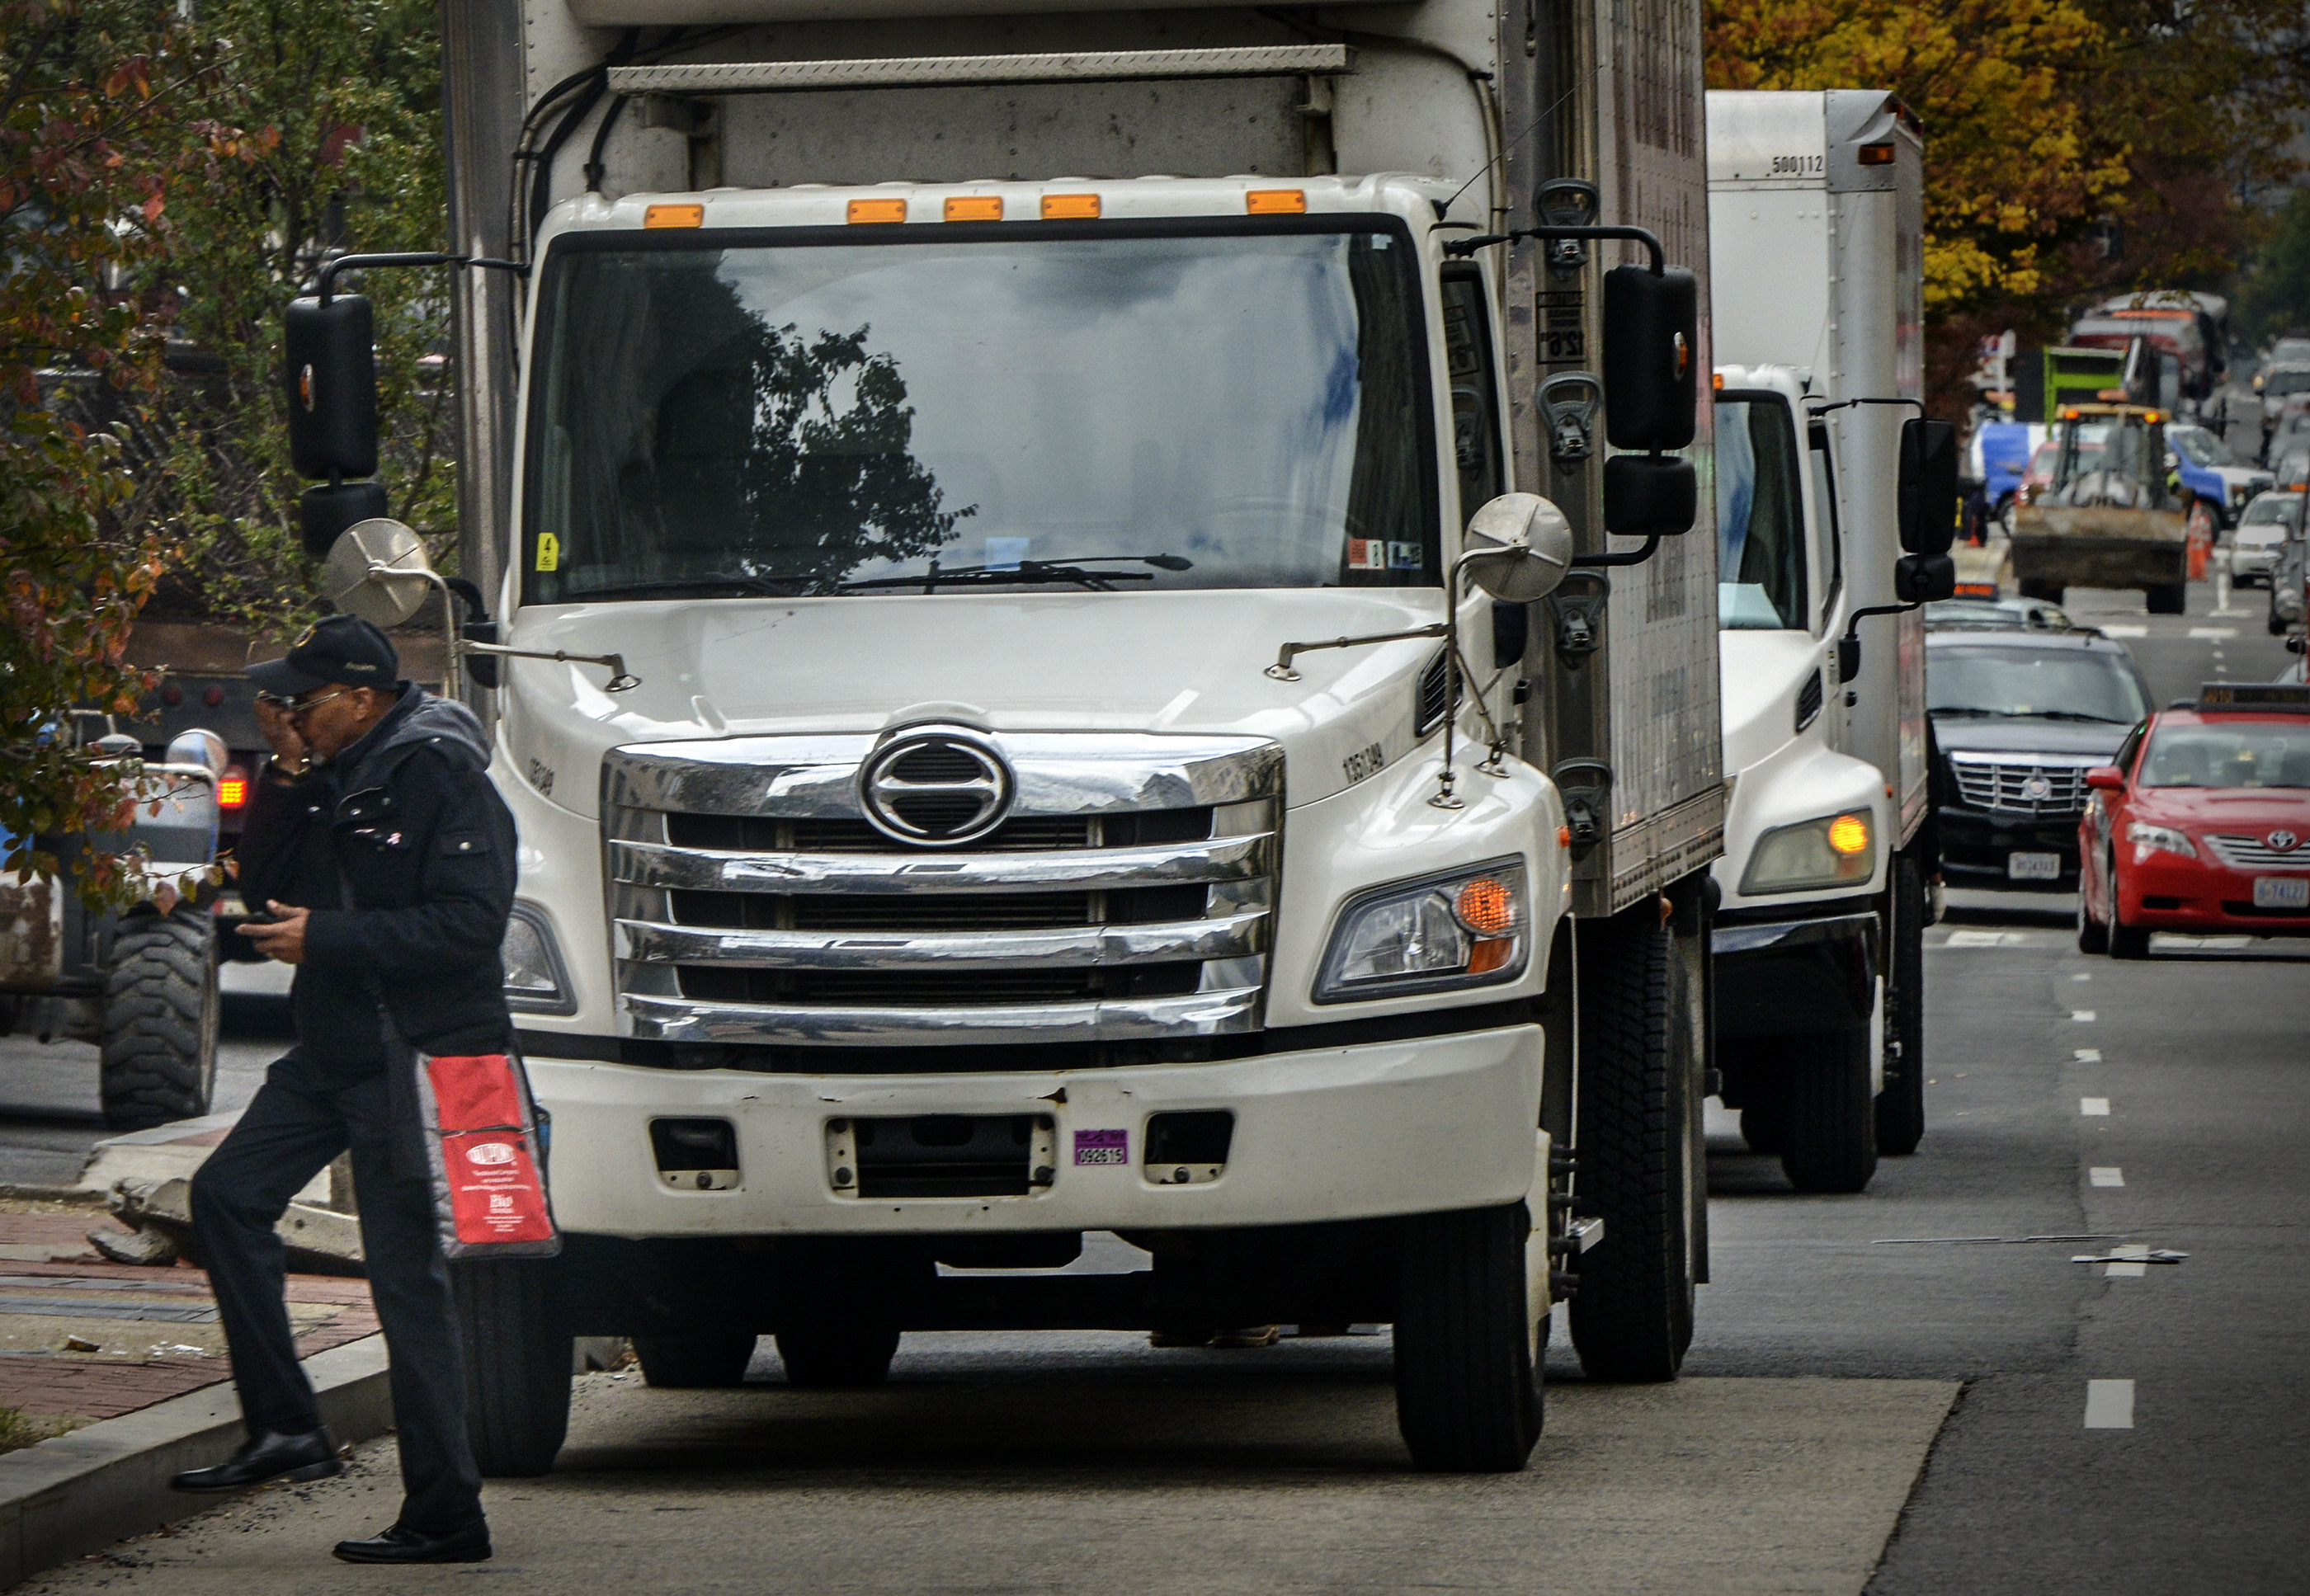 New DDOT regs starting Nov. 3, will require all delivery trucks in DC to have a $323 annual permit to use commercial loading zones, in Washington, DC.